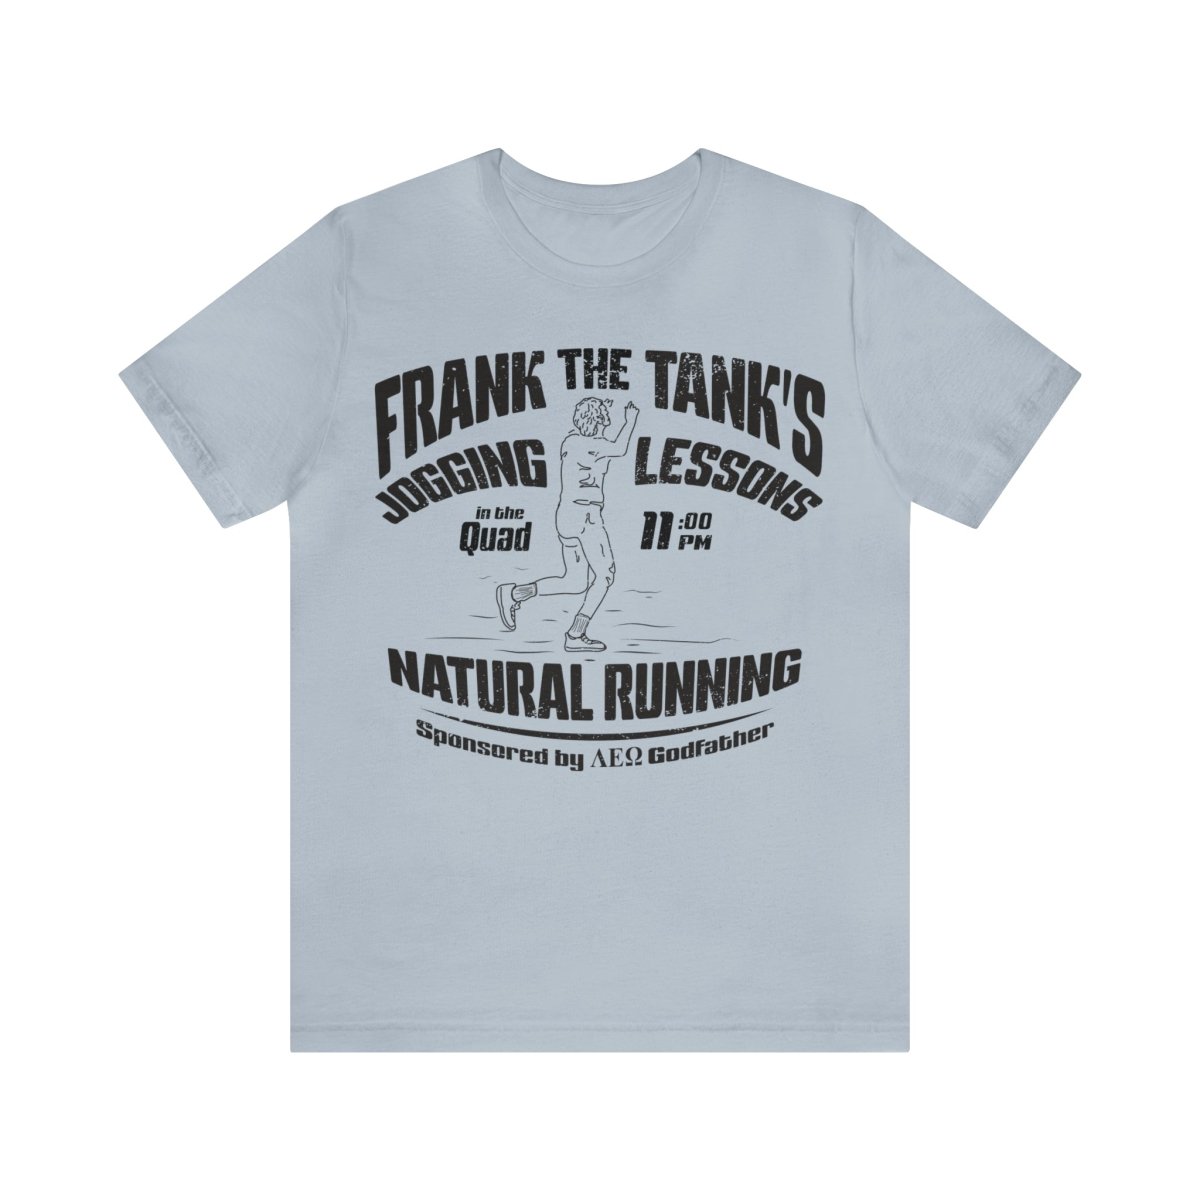 Frank The Tank Premium T-Shirt, Jogging Lessons, Run Naturally, Fraternity Sponsored, In The Quad, College Life, Funny